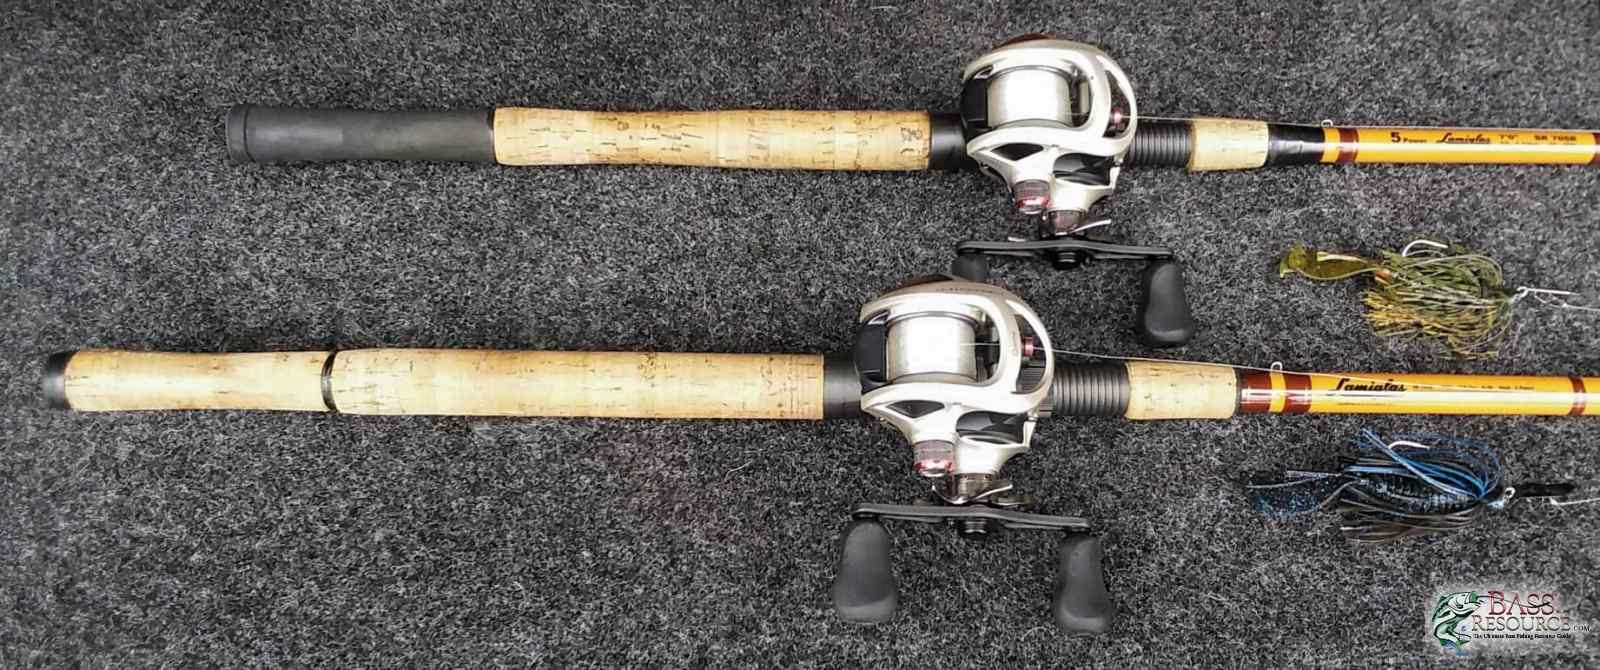 Dedicated Chatterbait Rod - Fishing Rods, Reels, Line, and Knots